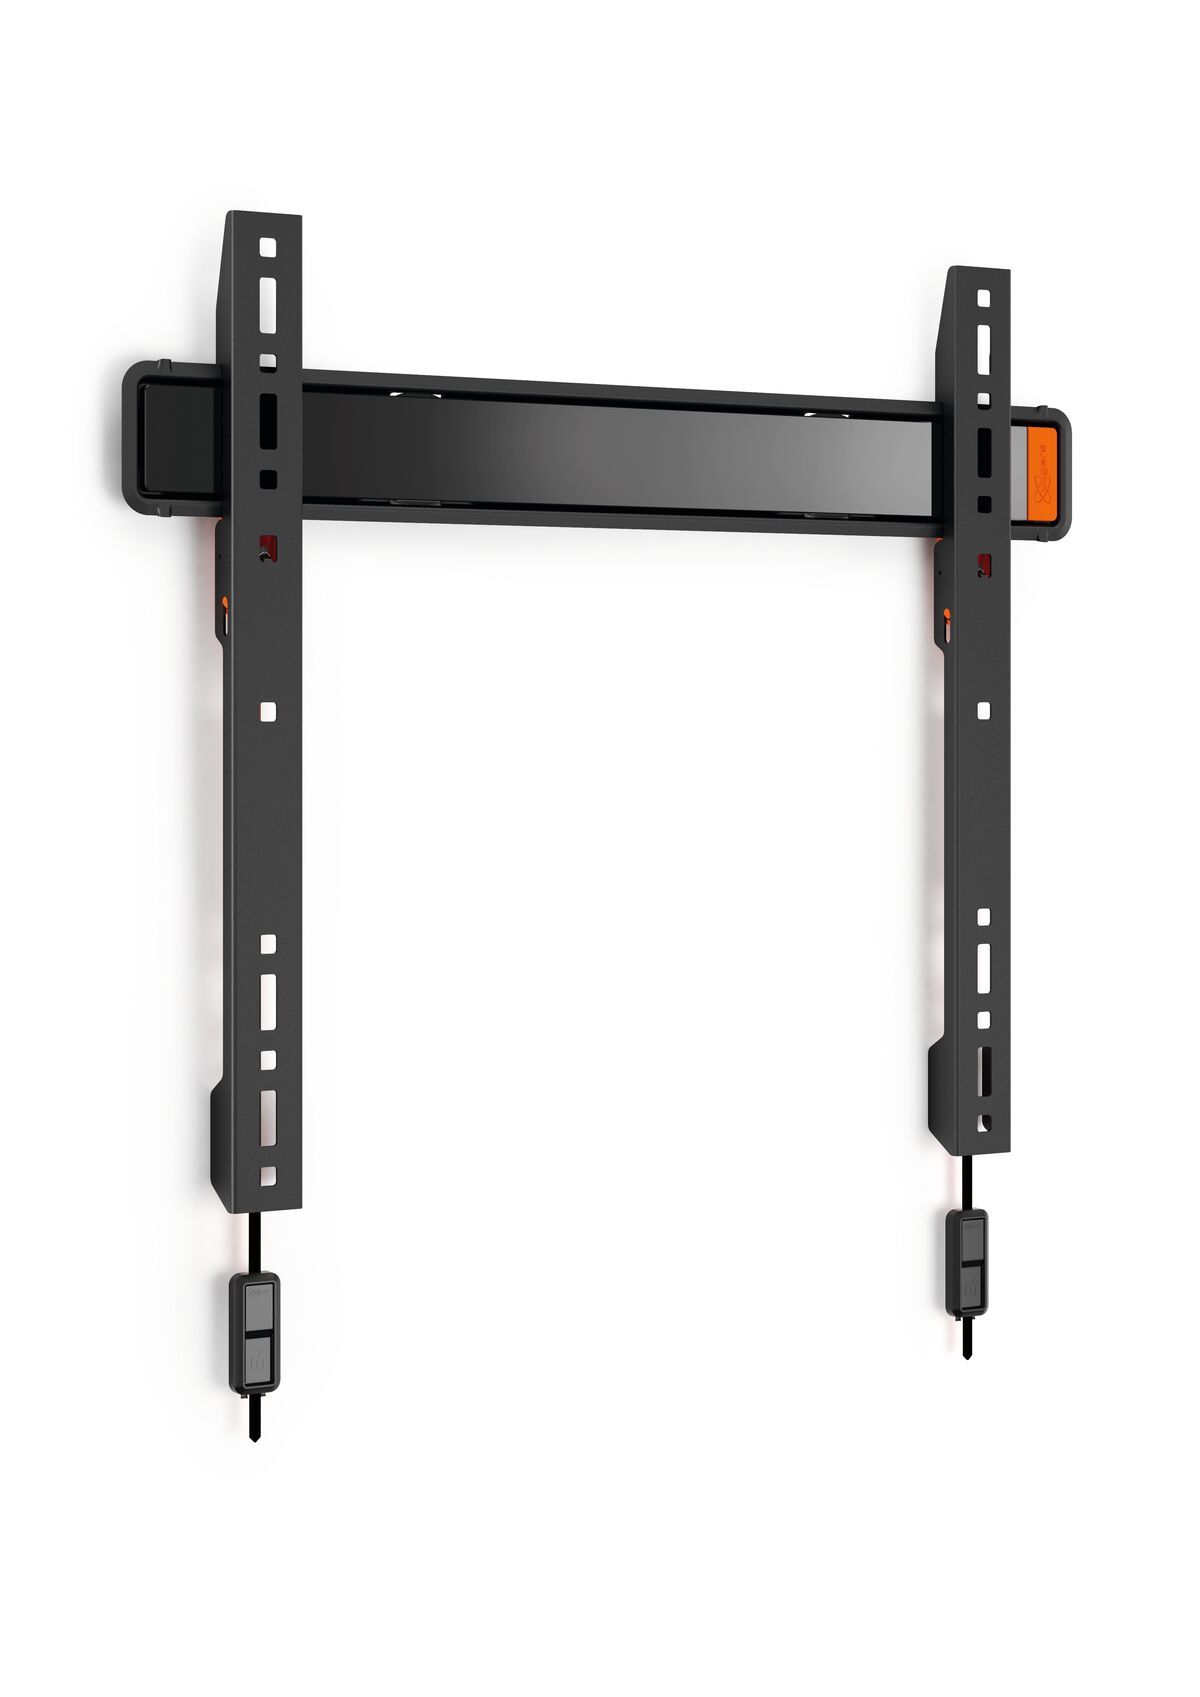 Vogel's WALL 2205 Fixed TV Wall Mount - Suitable for 32 up to 55 inch TVs up to Product